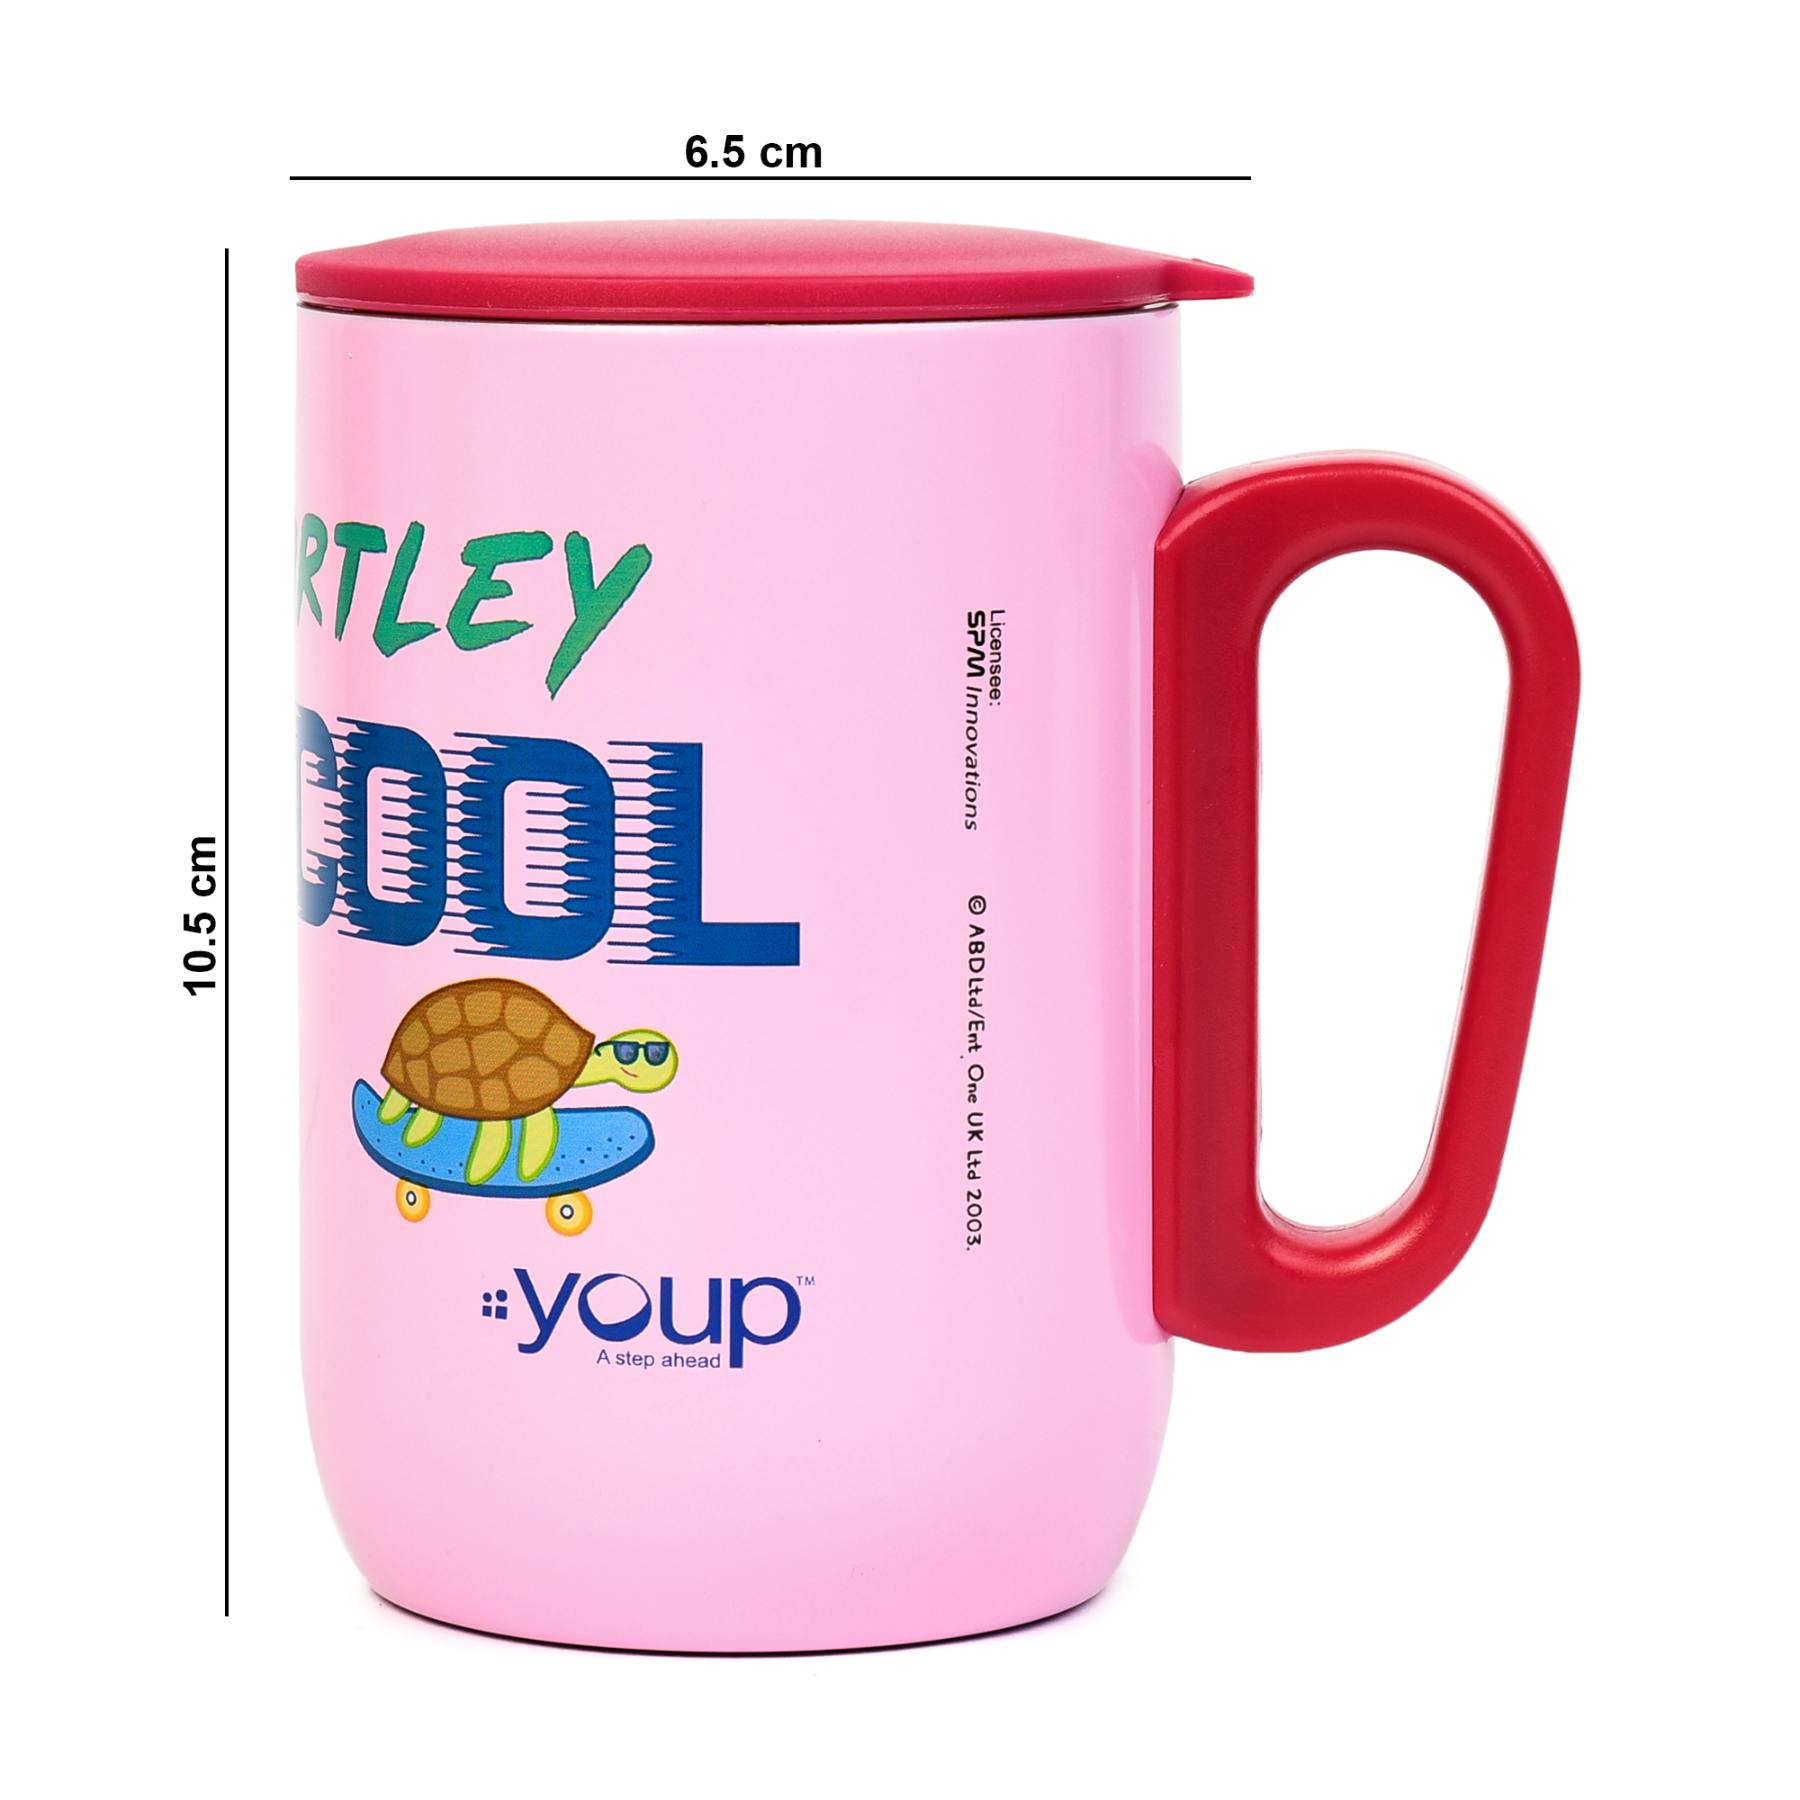 Youp Stainless Steel Pink Color Peppa Pig Cool Kids Insulated Mug With Cap Sorso-Ppm - 320 Ml